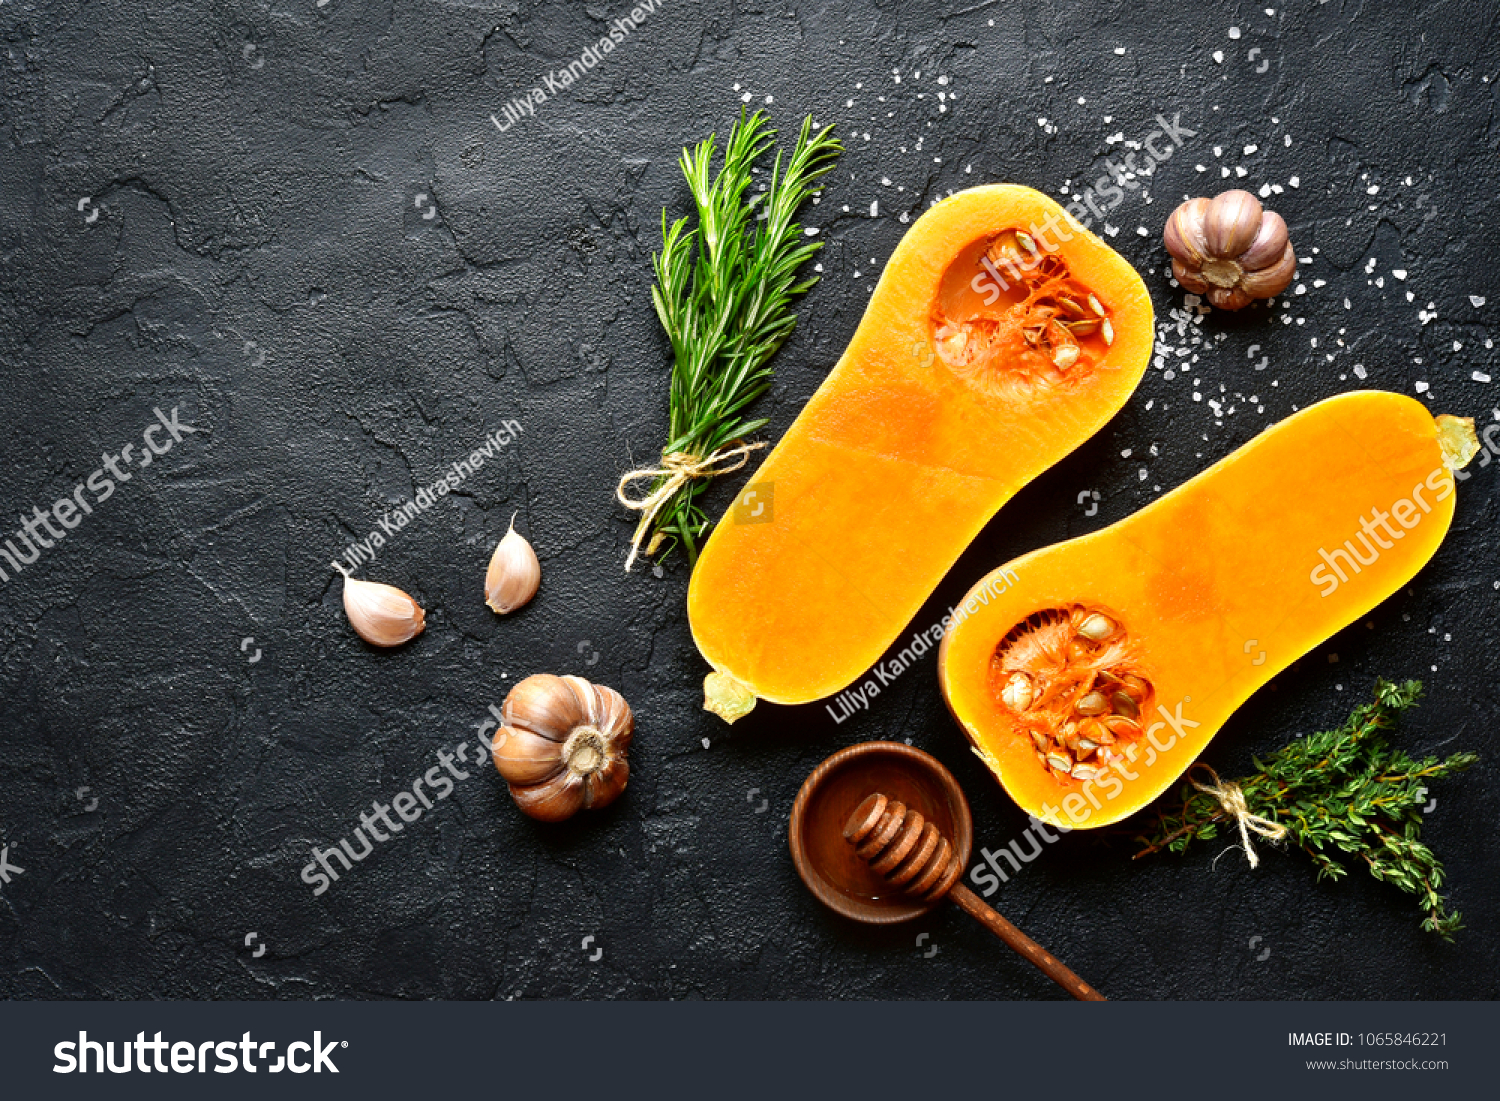 Halves of raw organic butternut squash with spices and ingredients for making on a black slate, stone or concrete background.Top view with copy space. #1065846221